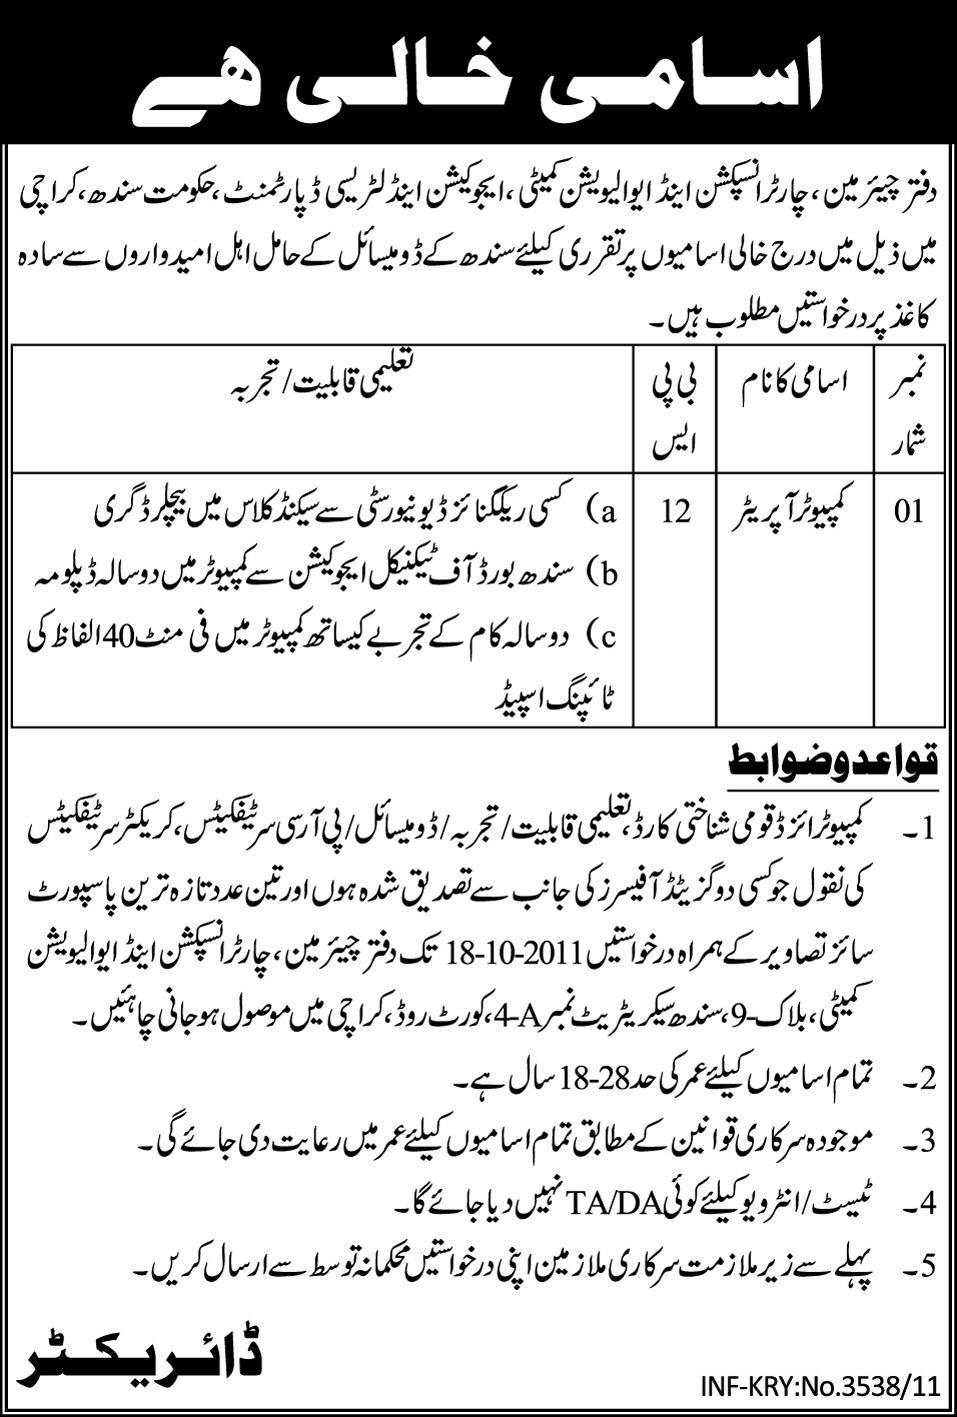 Education and Literacy Department, Sindh Job Oppurtunity